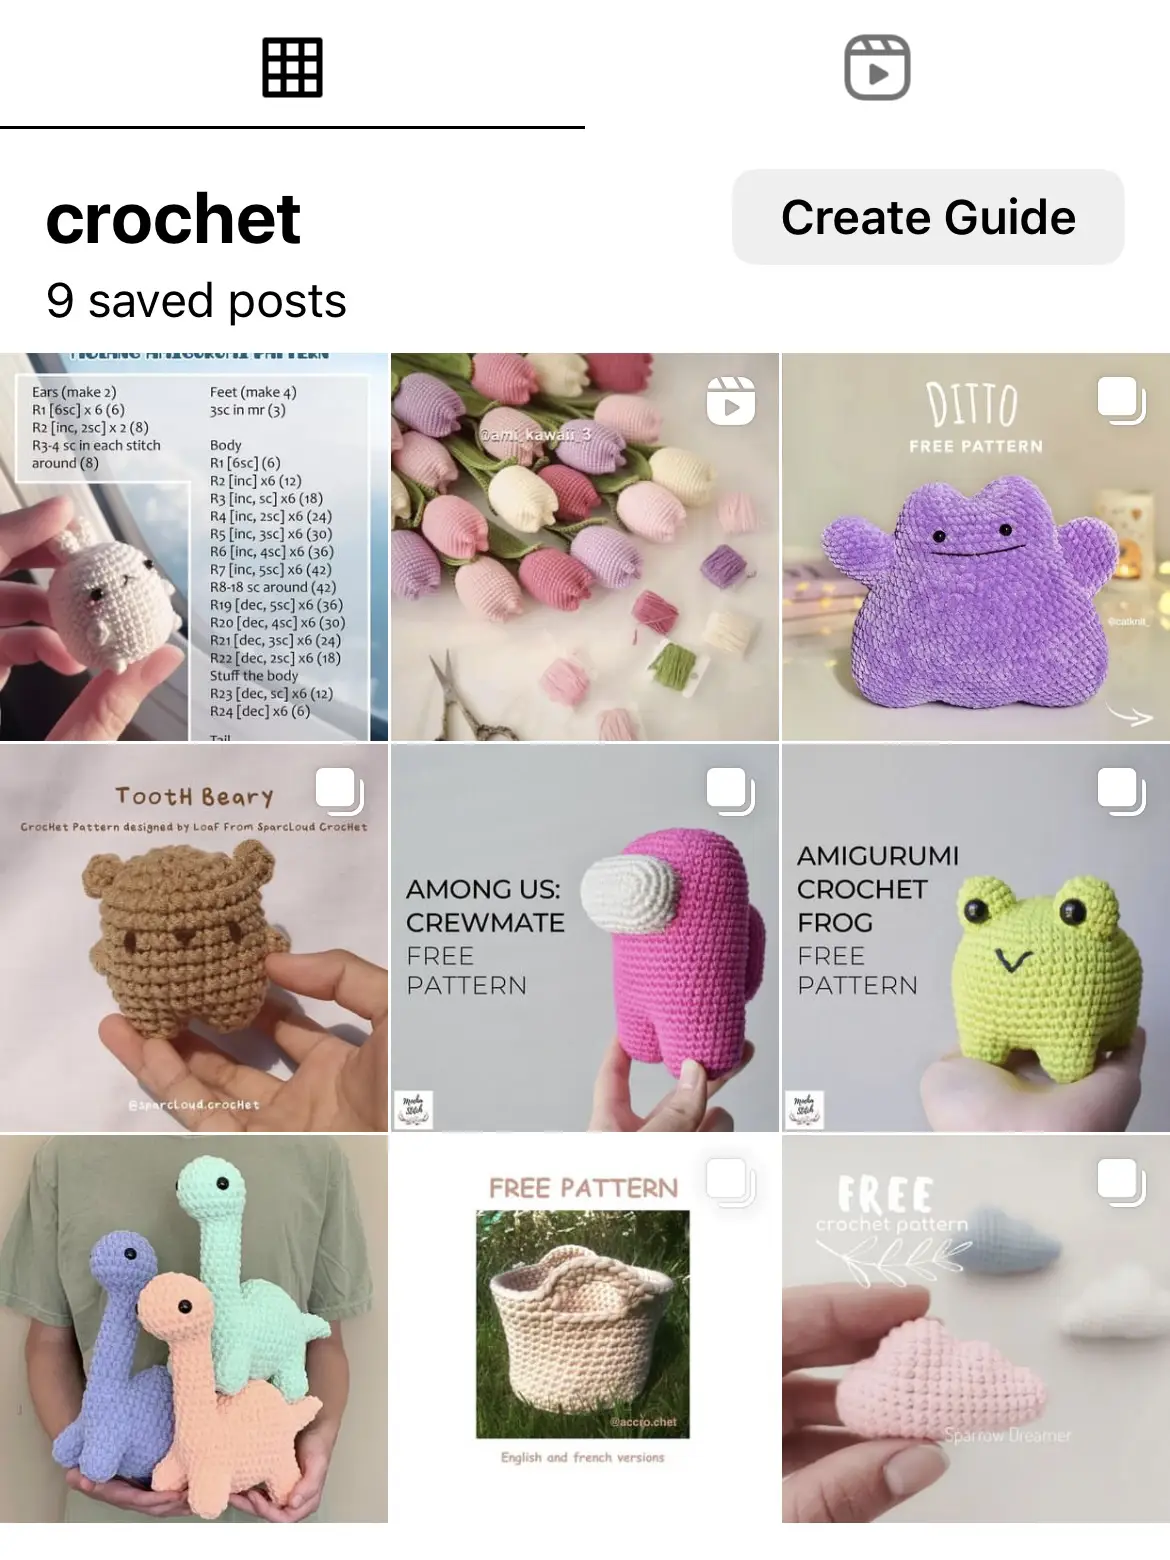 $0.49 YARNS 🤑 & CHEAP crochet supplies!!, Gallery posted by reeux 🍚